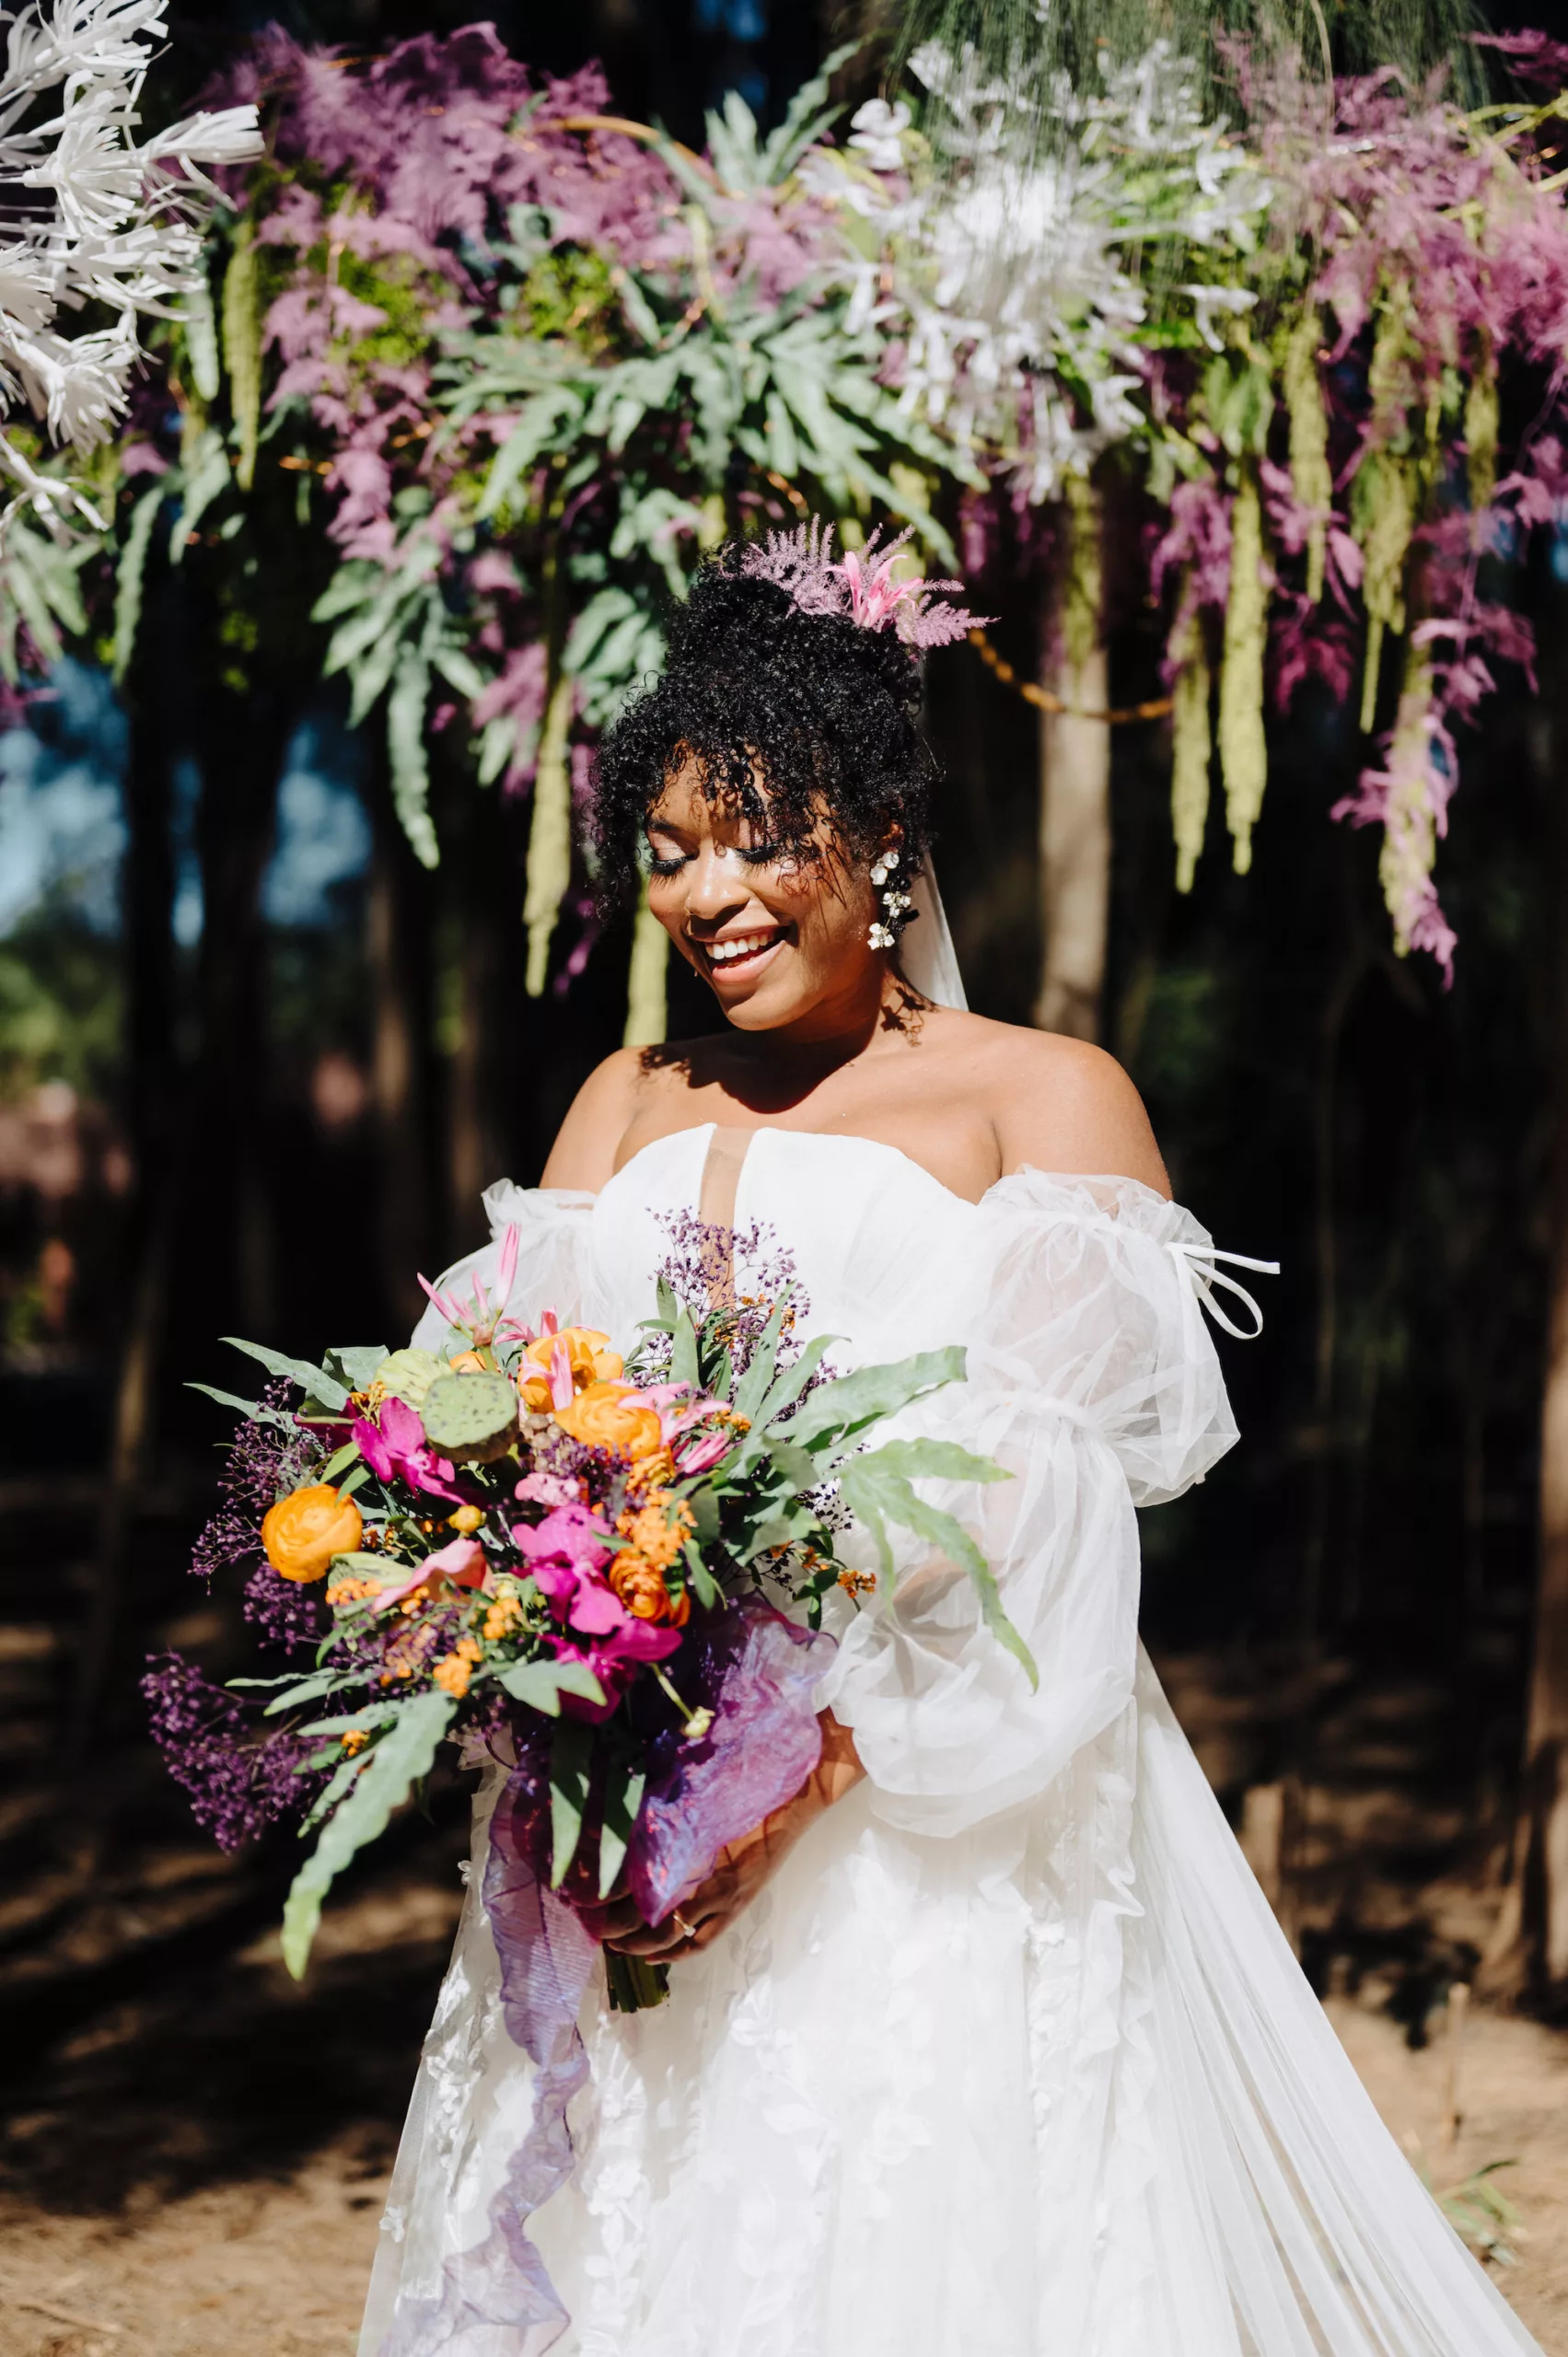 Whimsical Orange Anemones, and Roses, Purple and Pink Flower Spring Wedding Bouquet Ideas | White Strapless Tulle Wedding Dress with Removable Sleeves Inspiration | Tampa Bay Photographer McNeile Photography | Content Creator Behind The Vows | Planner Wilder Mind Events